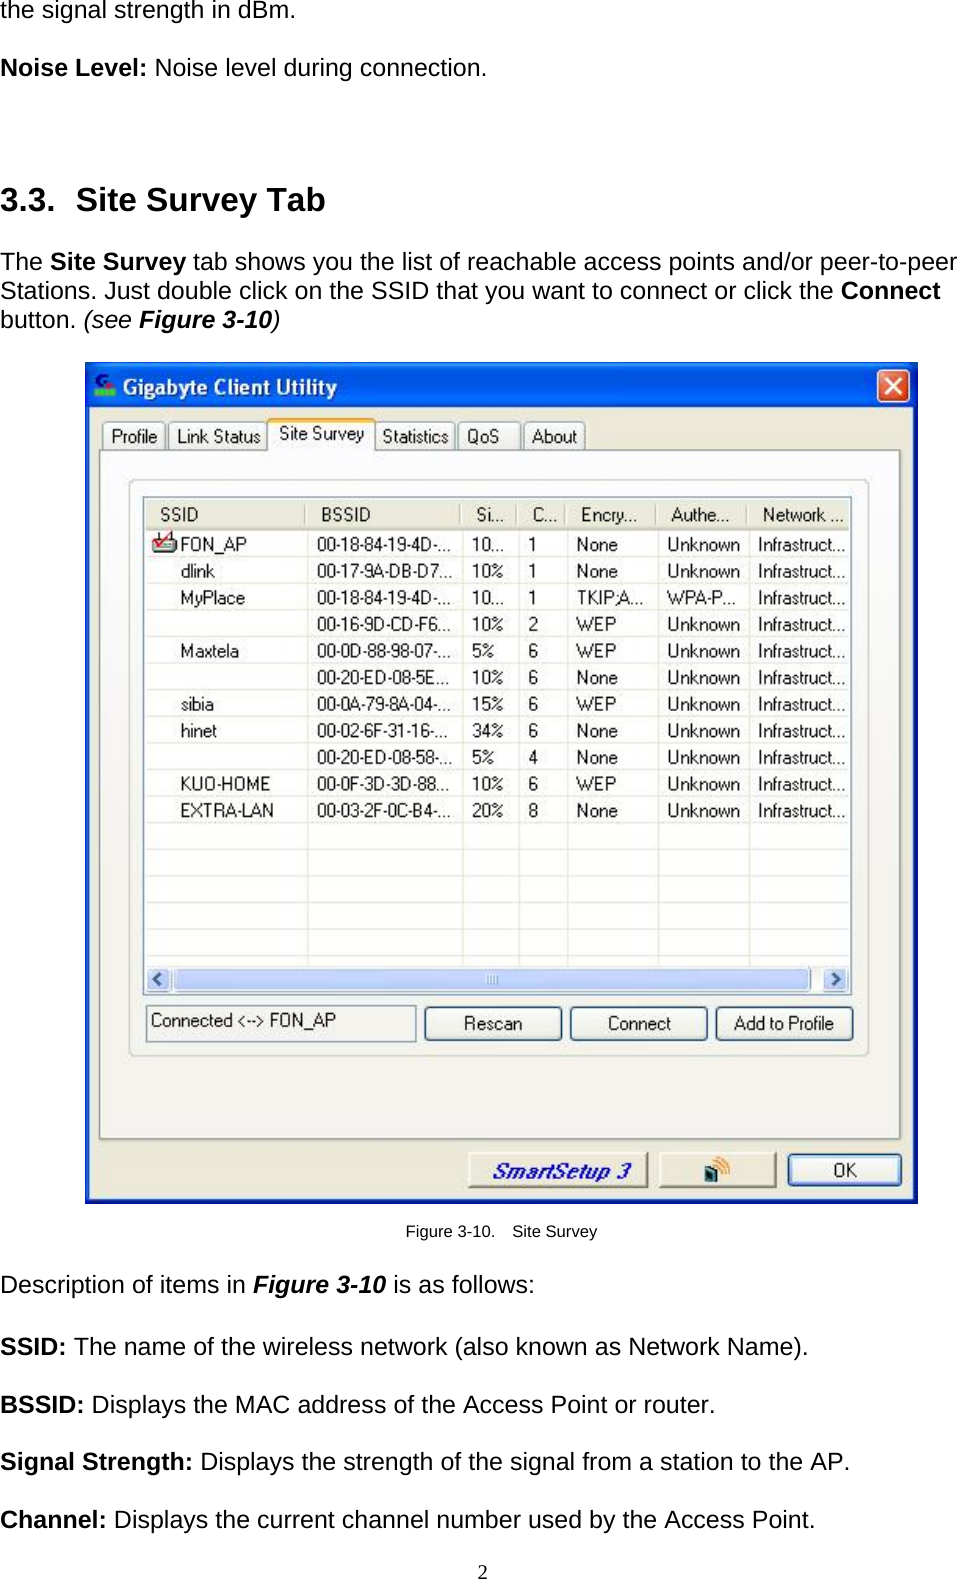 2   the signal strength in dBm.  Noise Level: Noise level during connection.    3.3.   Site Survey Tab  The Site Survey tab shows you the list of reachable access points and/or peer-to-peer Stations. Just double click on the SSID that you want to connect or click the Connect button. (see Figure 3-10)    Figure 3-10.  Site Survey  Description of items in Figure 3-10 is as follows:  SSID: The name of the wireless network (also known as Network Name).  BSSID: Displays the MAC address of the Access Point or router.  Signal Strength: Displays the strength of the signal from a station to the AP.  Channel: Displays the current channel number used by the Access Point. 